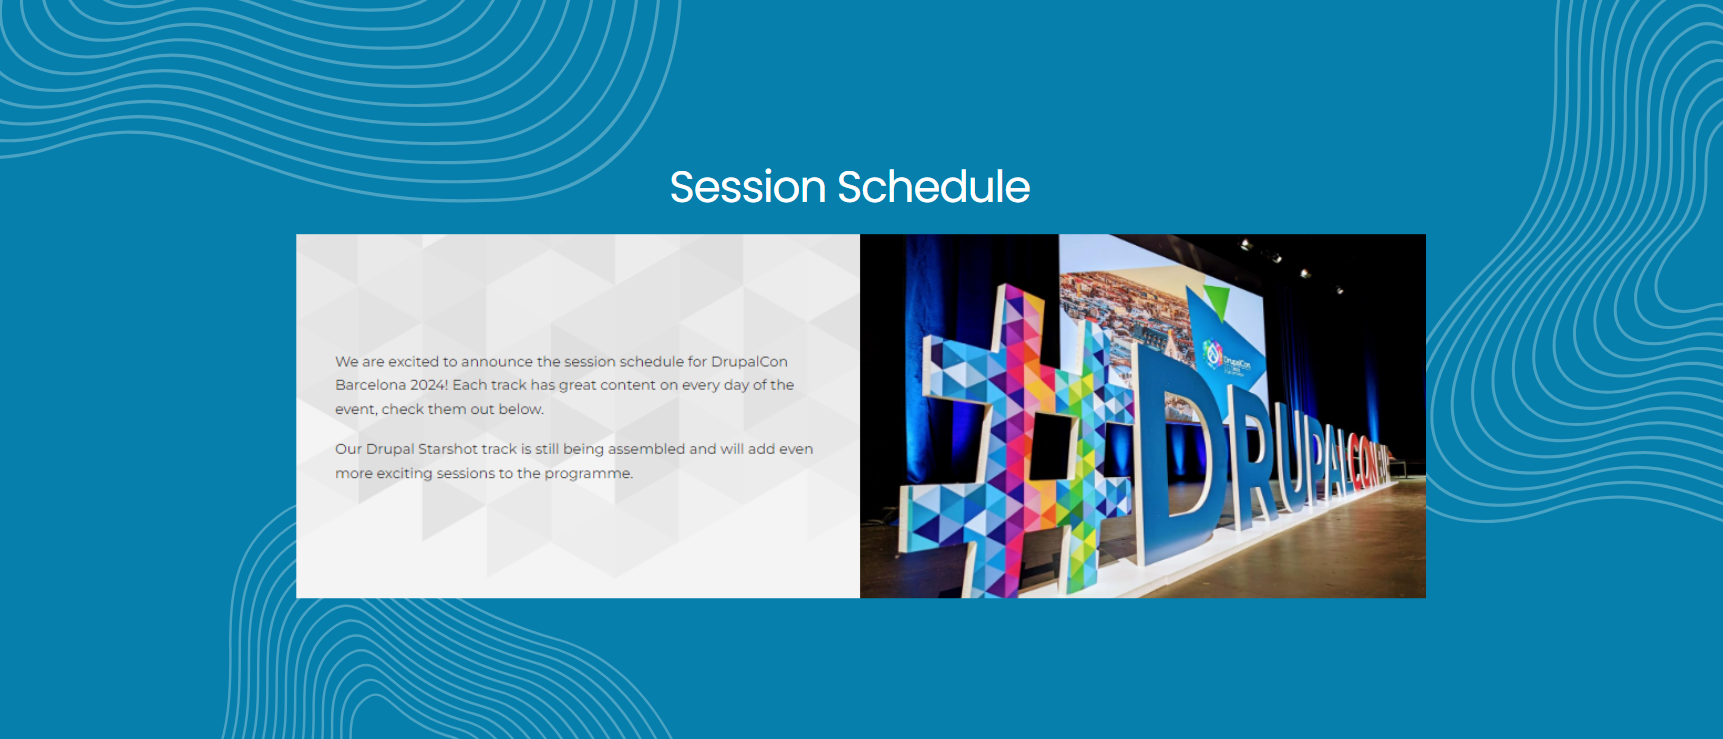 Session Schedule picture 